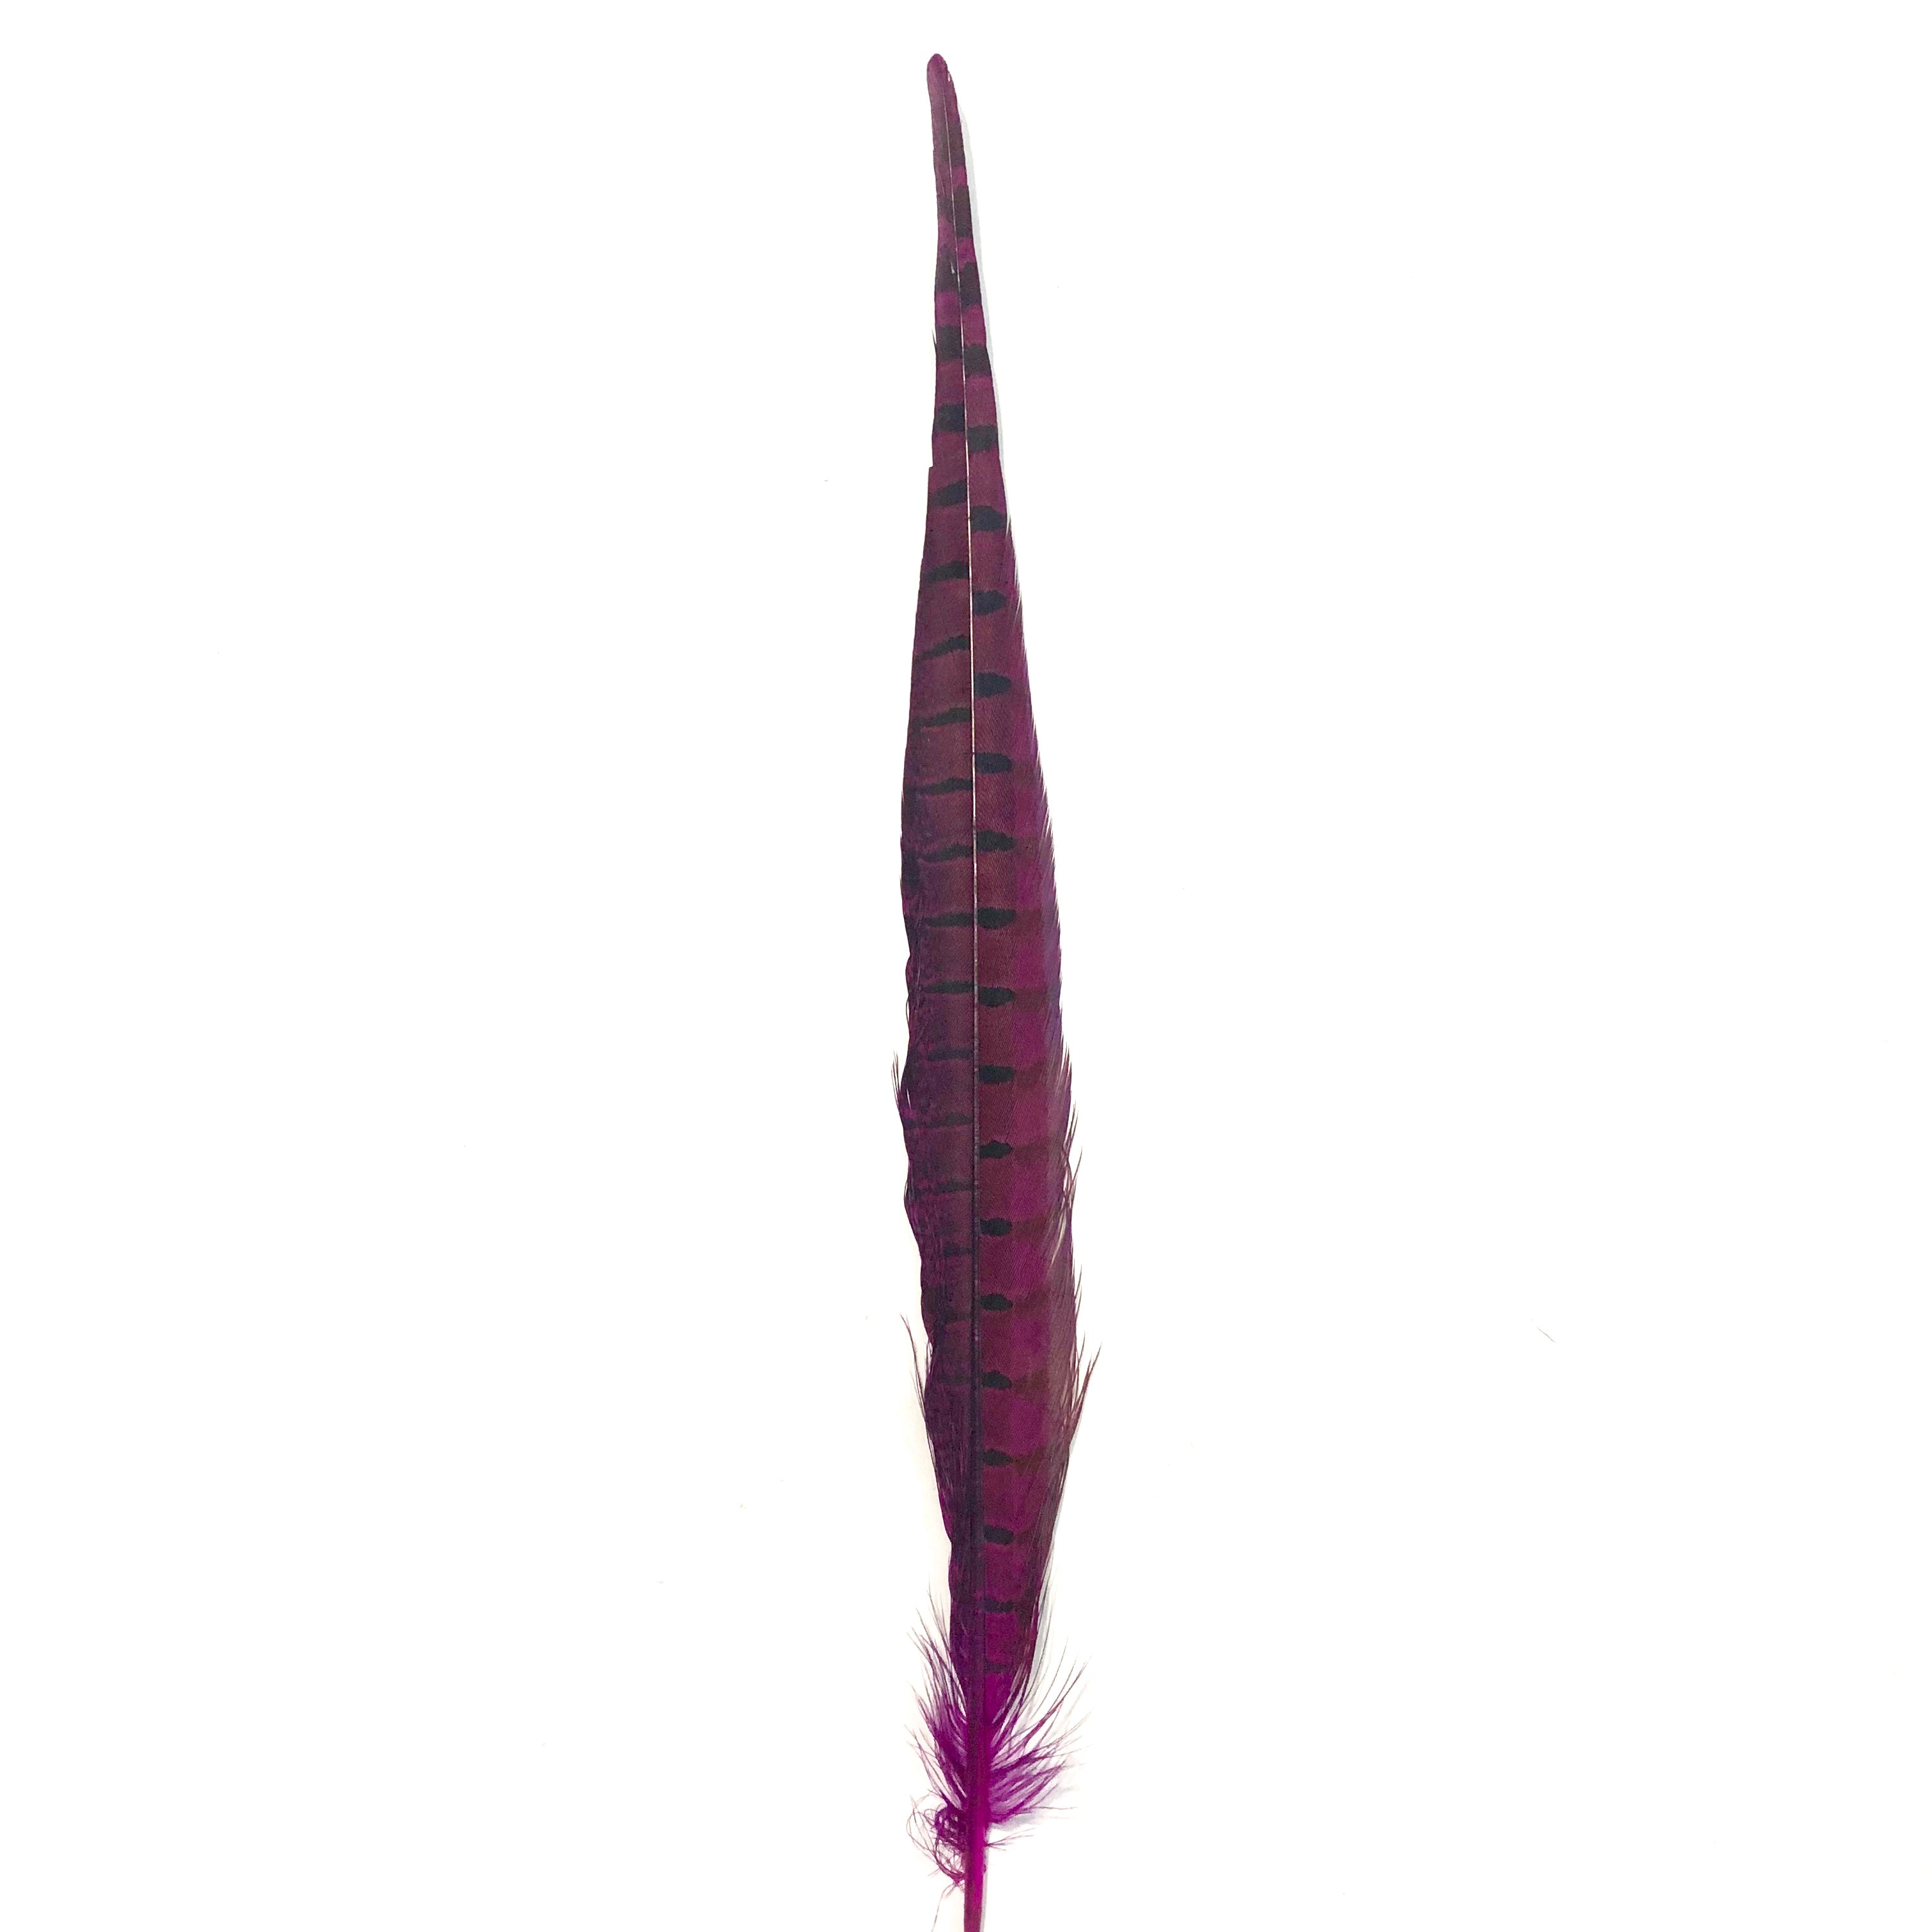 10" to 20" Ringneck Pheasant Tail Feather - Cerise